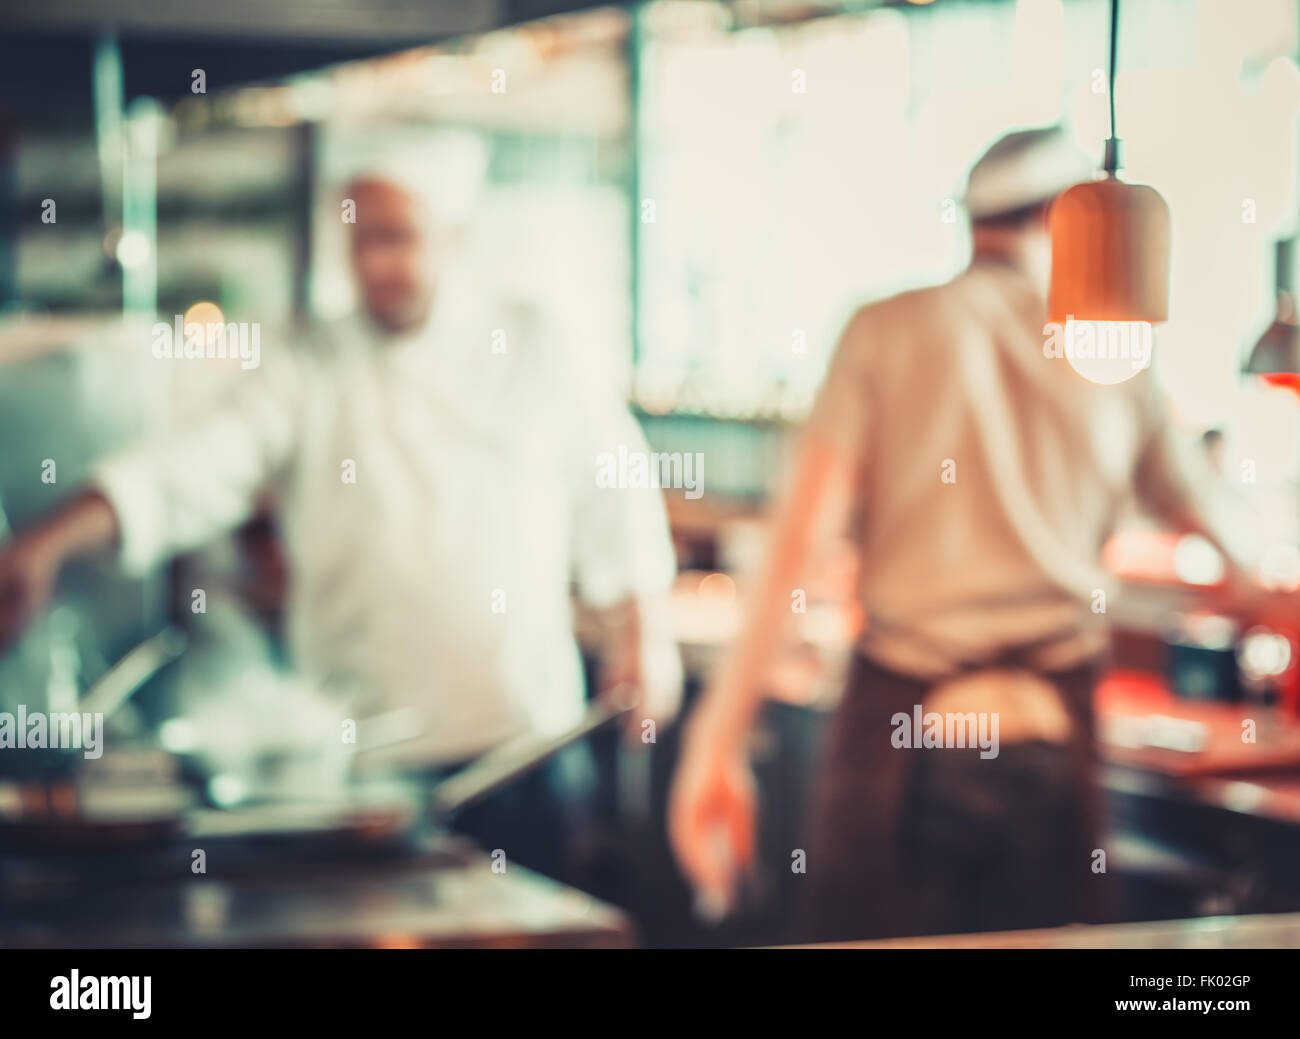 workers cooking in restaurant Stock Photo